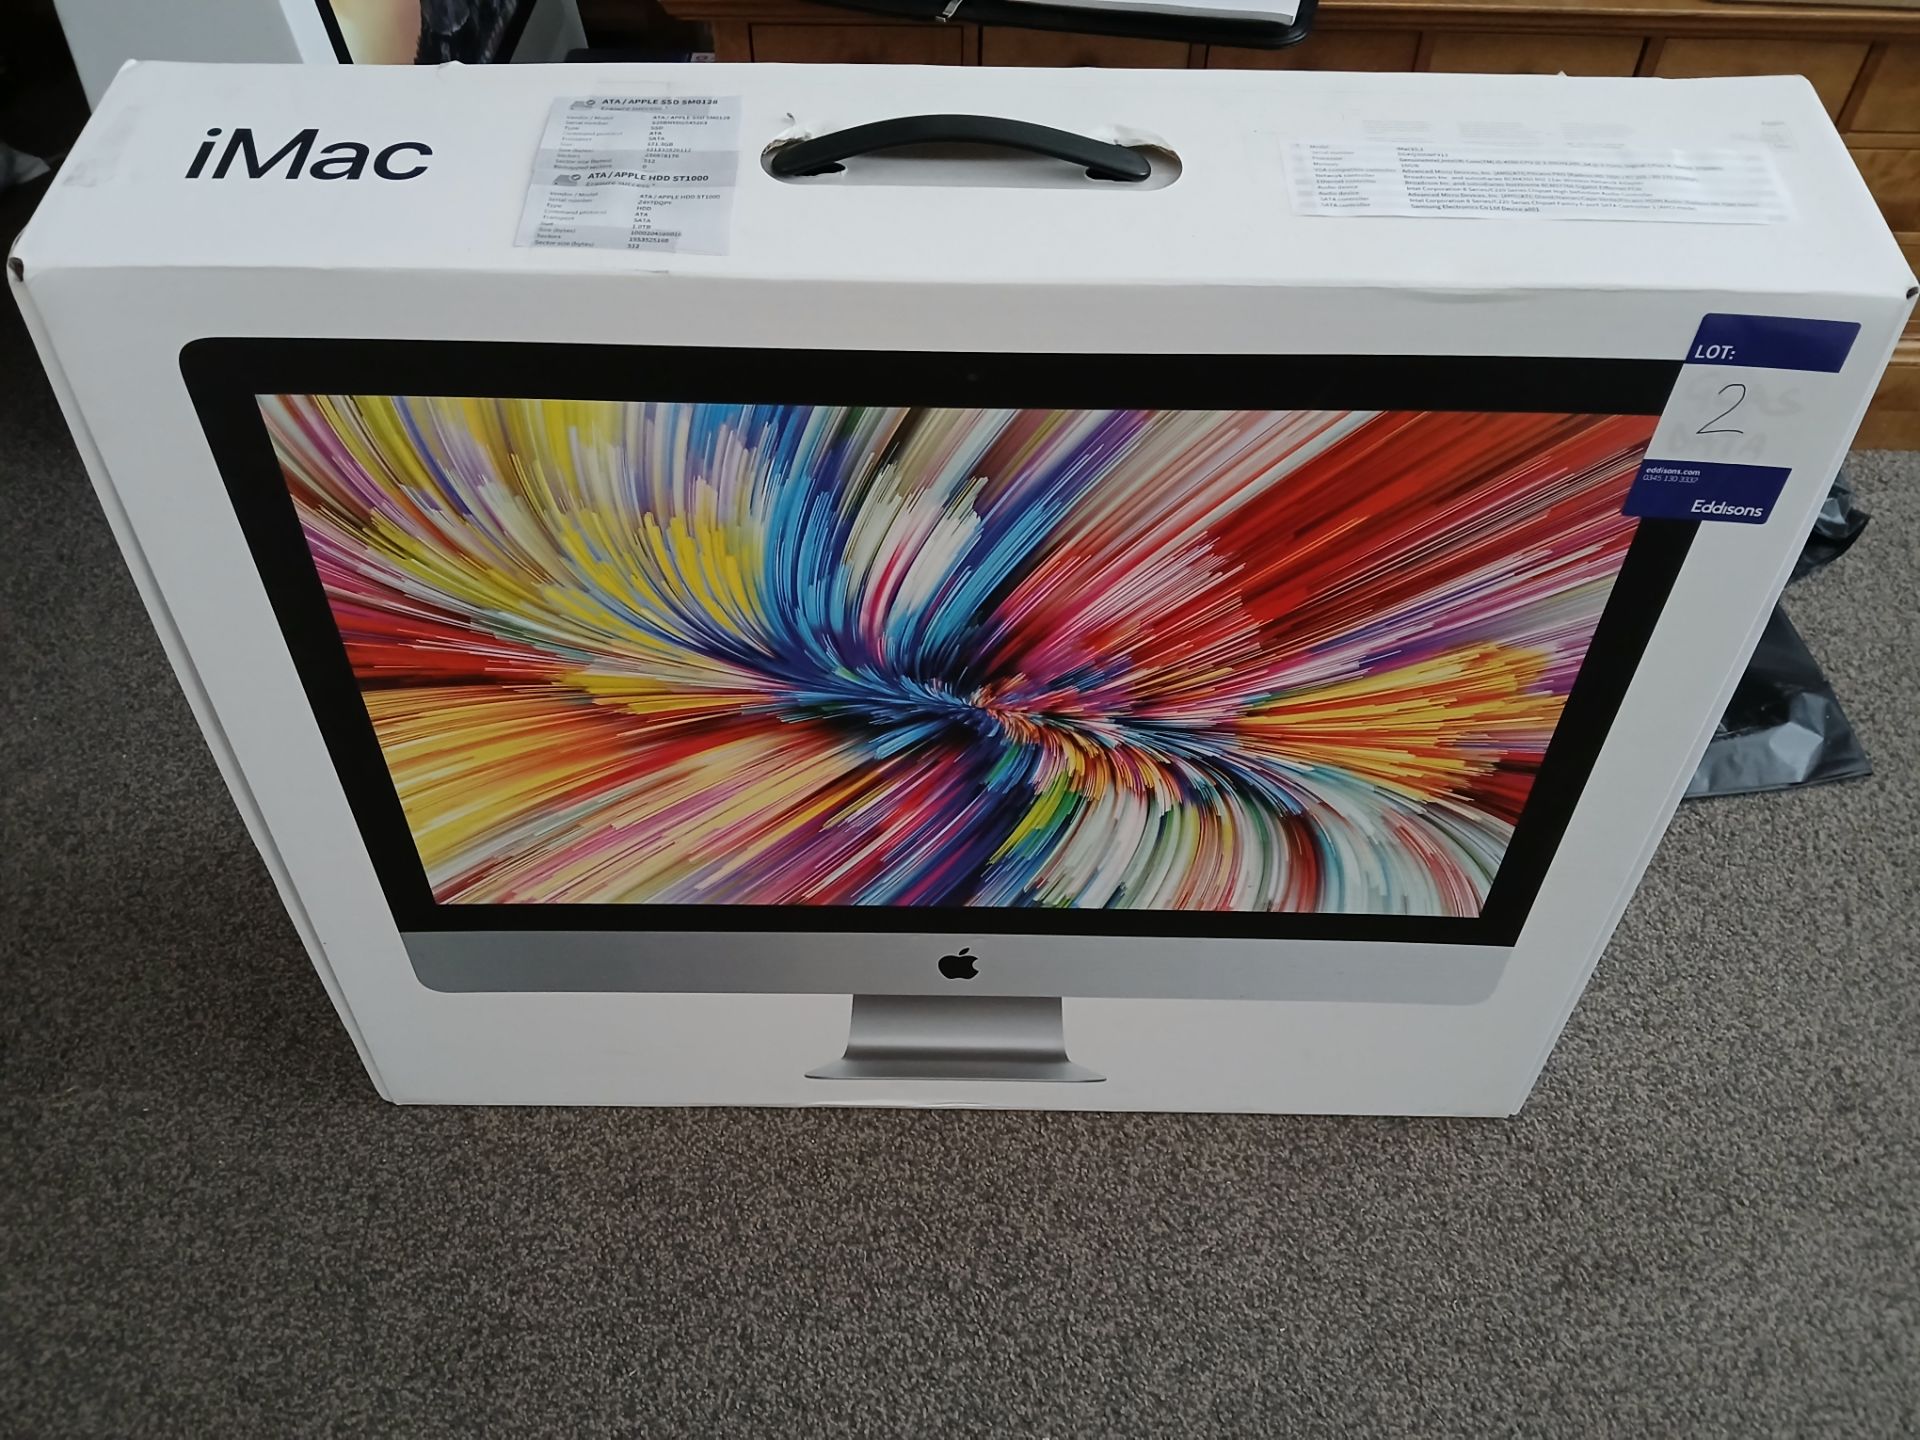 Apple iMac (Retina 5K, 27”, Mid 2015), Serial Number DGKQ306WFY13, with keyboard (No Mouse or - Image 2 of 14